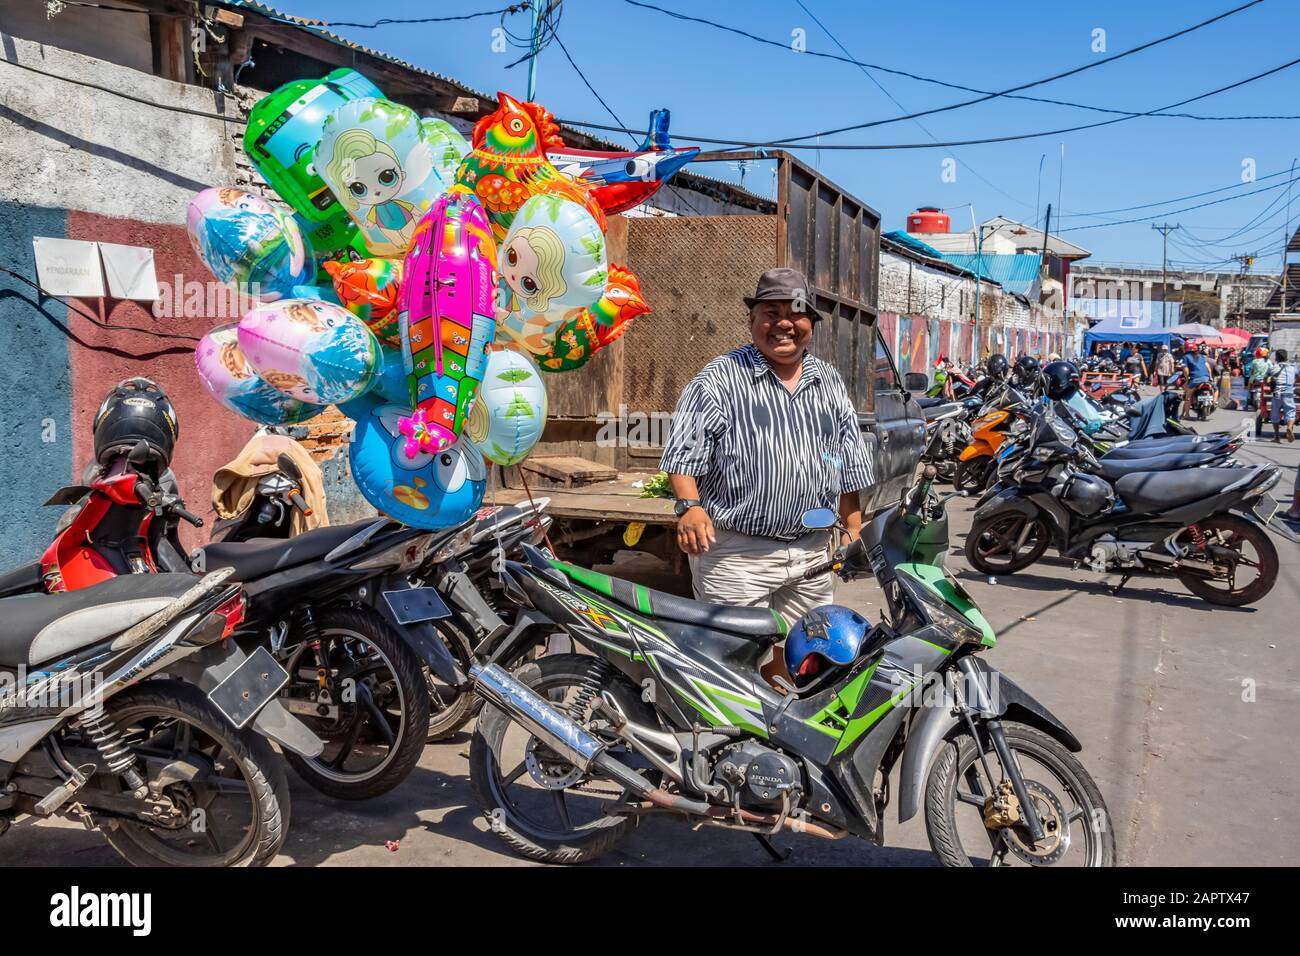 Man standing by a motorcycle with balloons; Manado, North Sulawesi, Indonesia Stock Photo